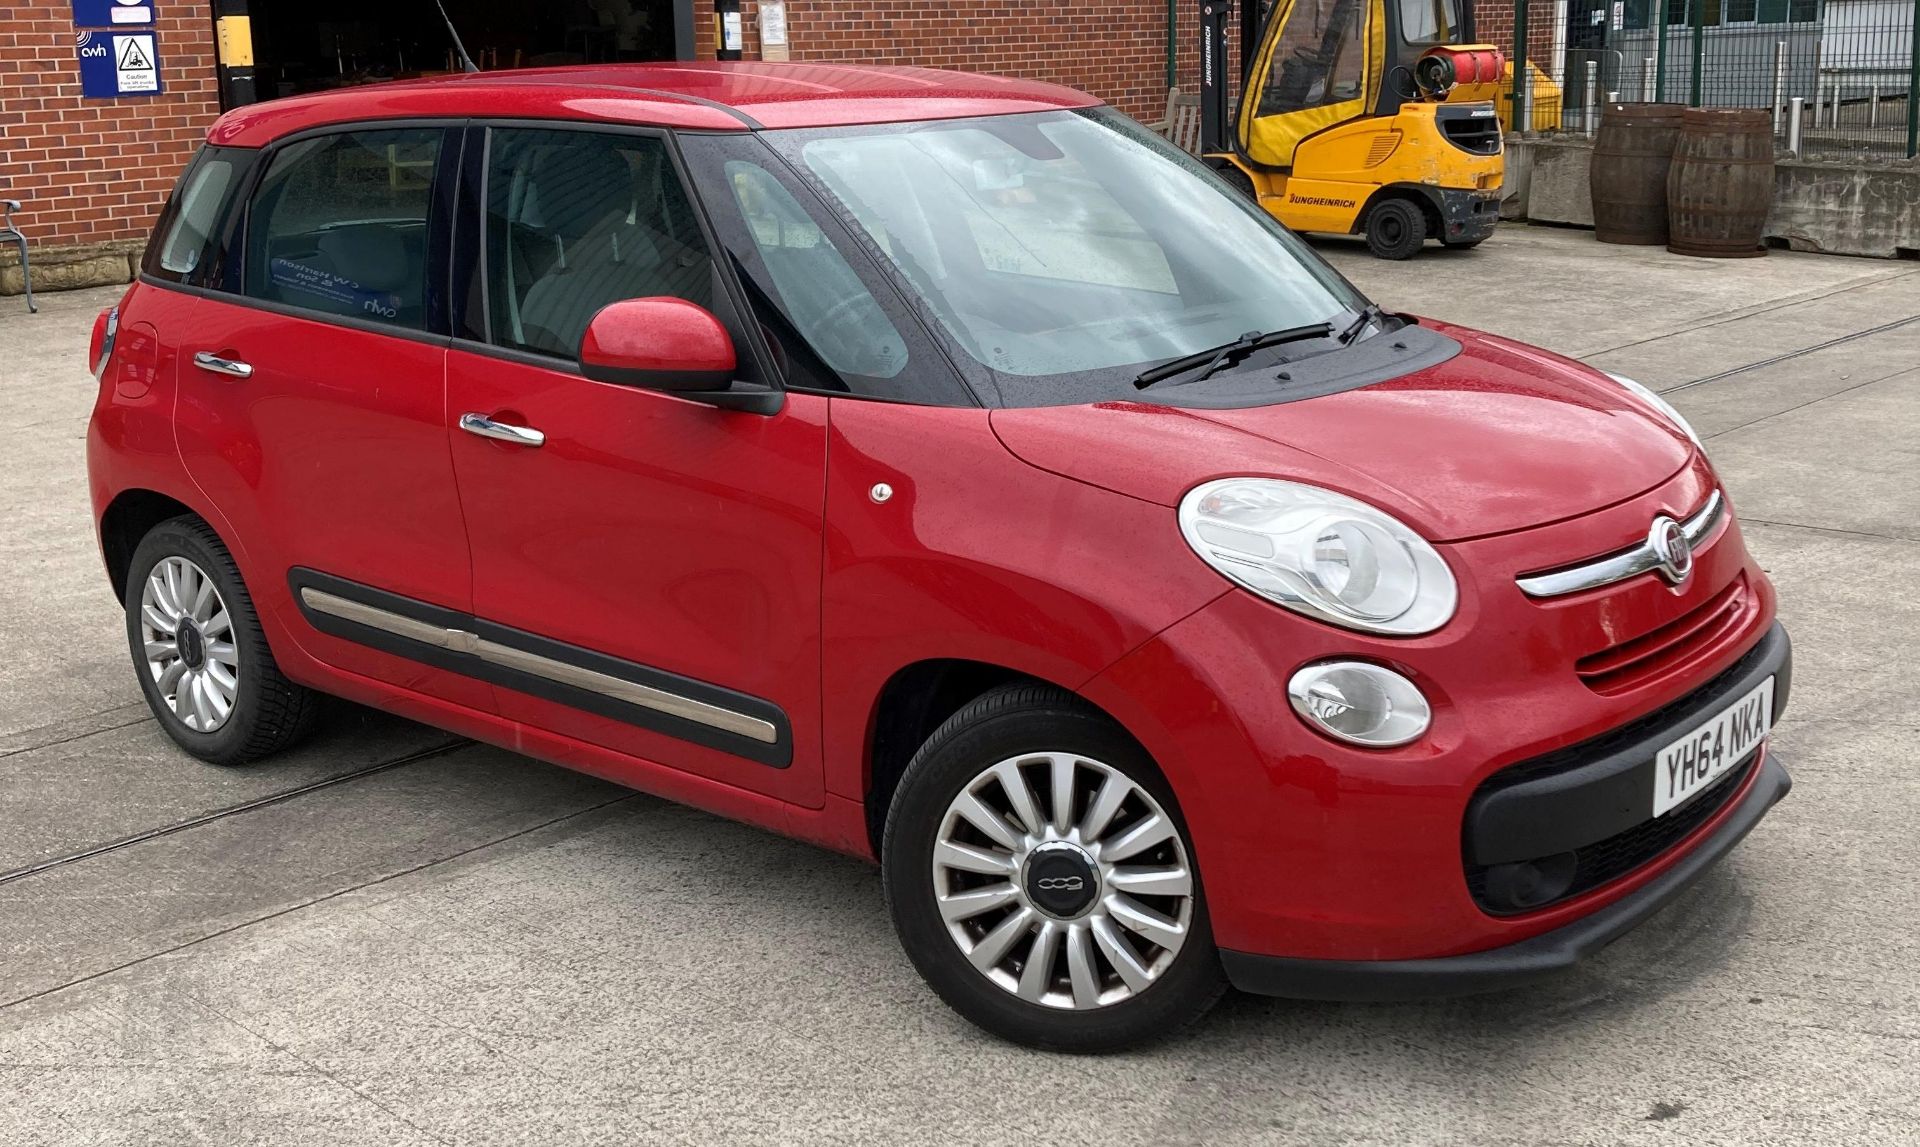 FIAT 500L POP STAR MULTI-JET 1.2 MPV - DIESEL - RED. On the instructions of: A retained client. - Image 2 of 16